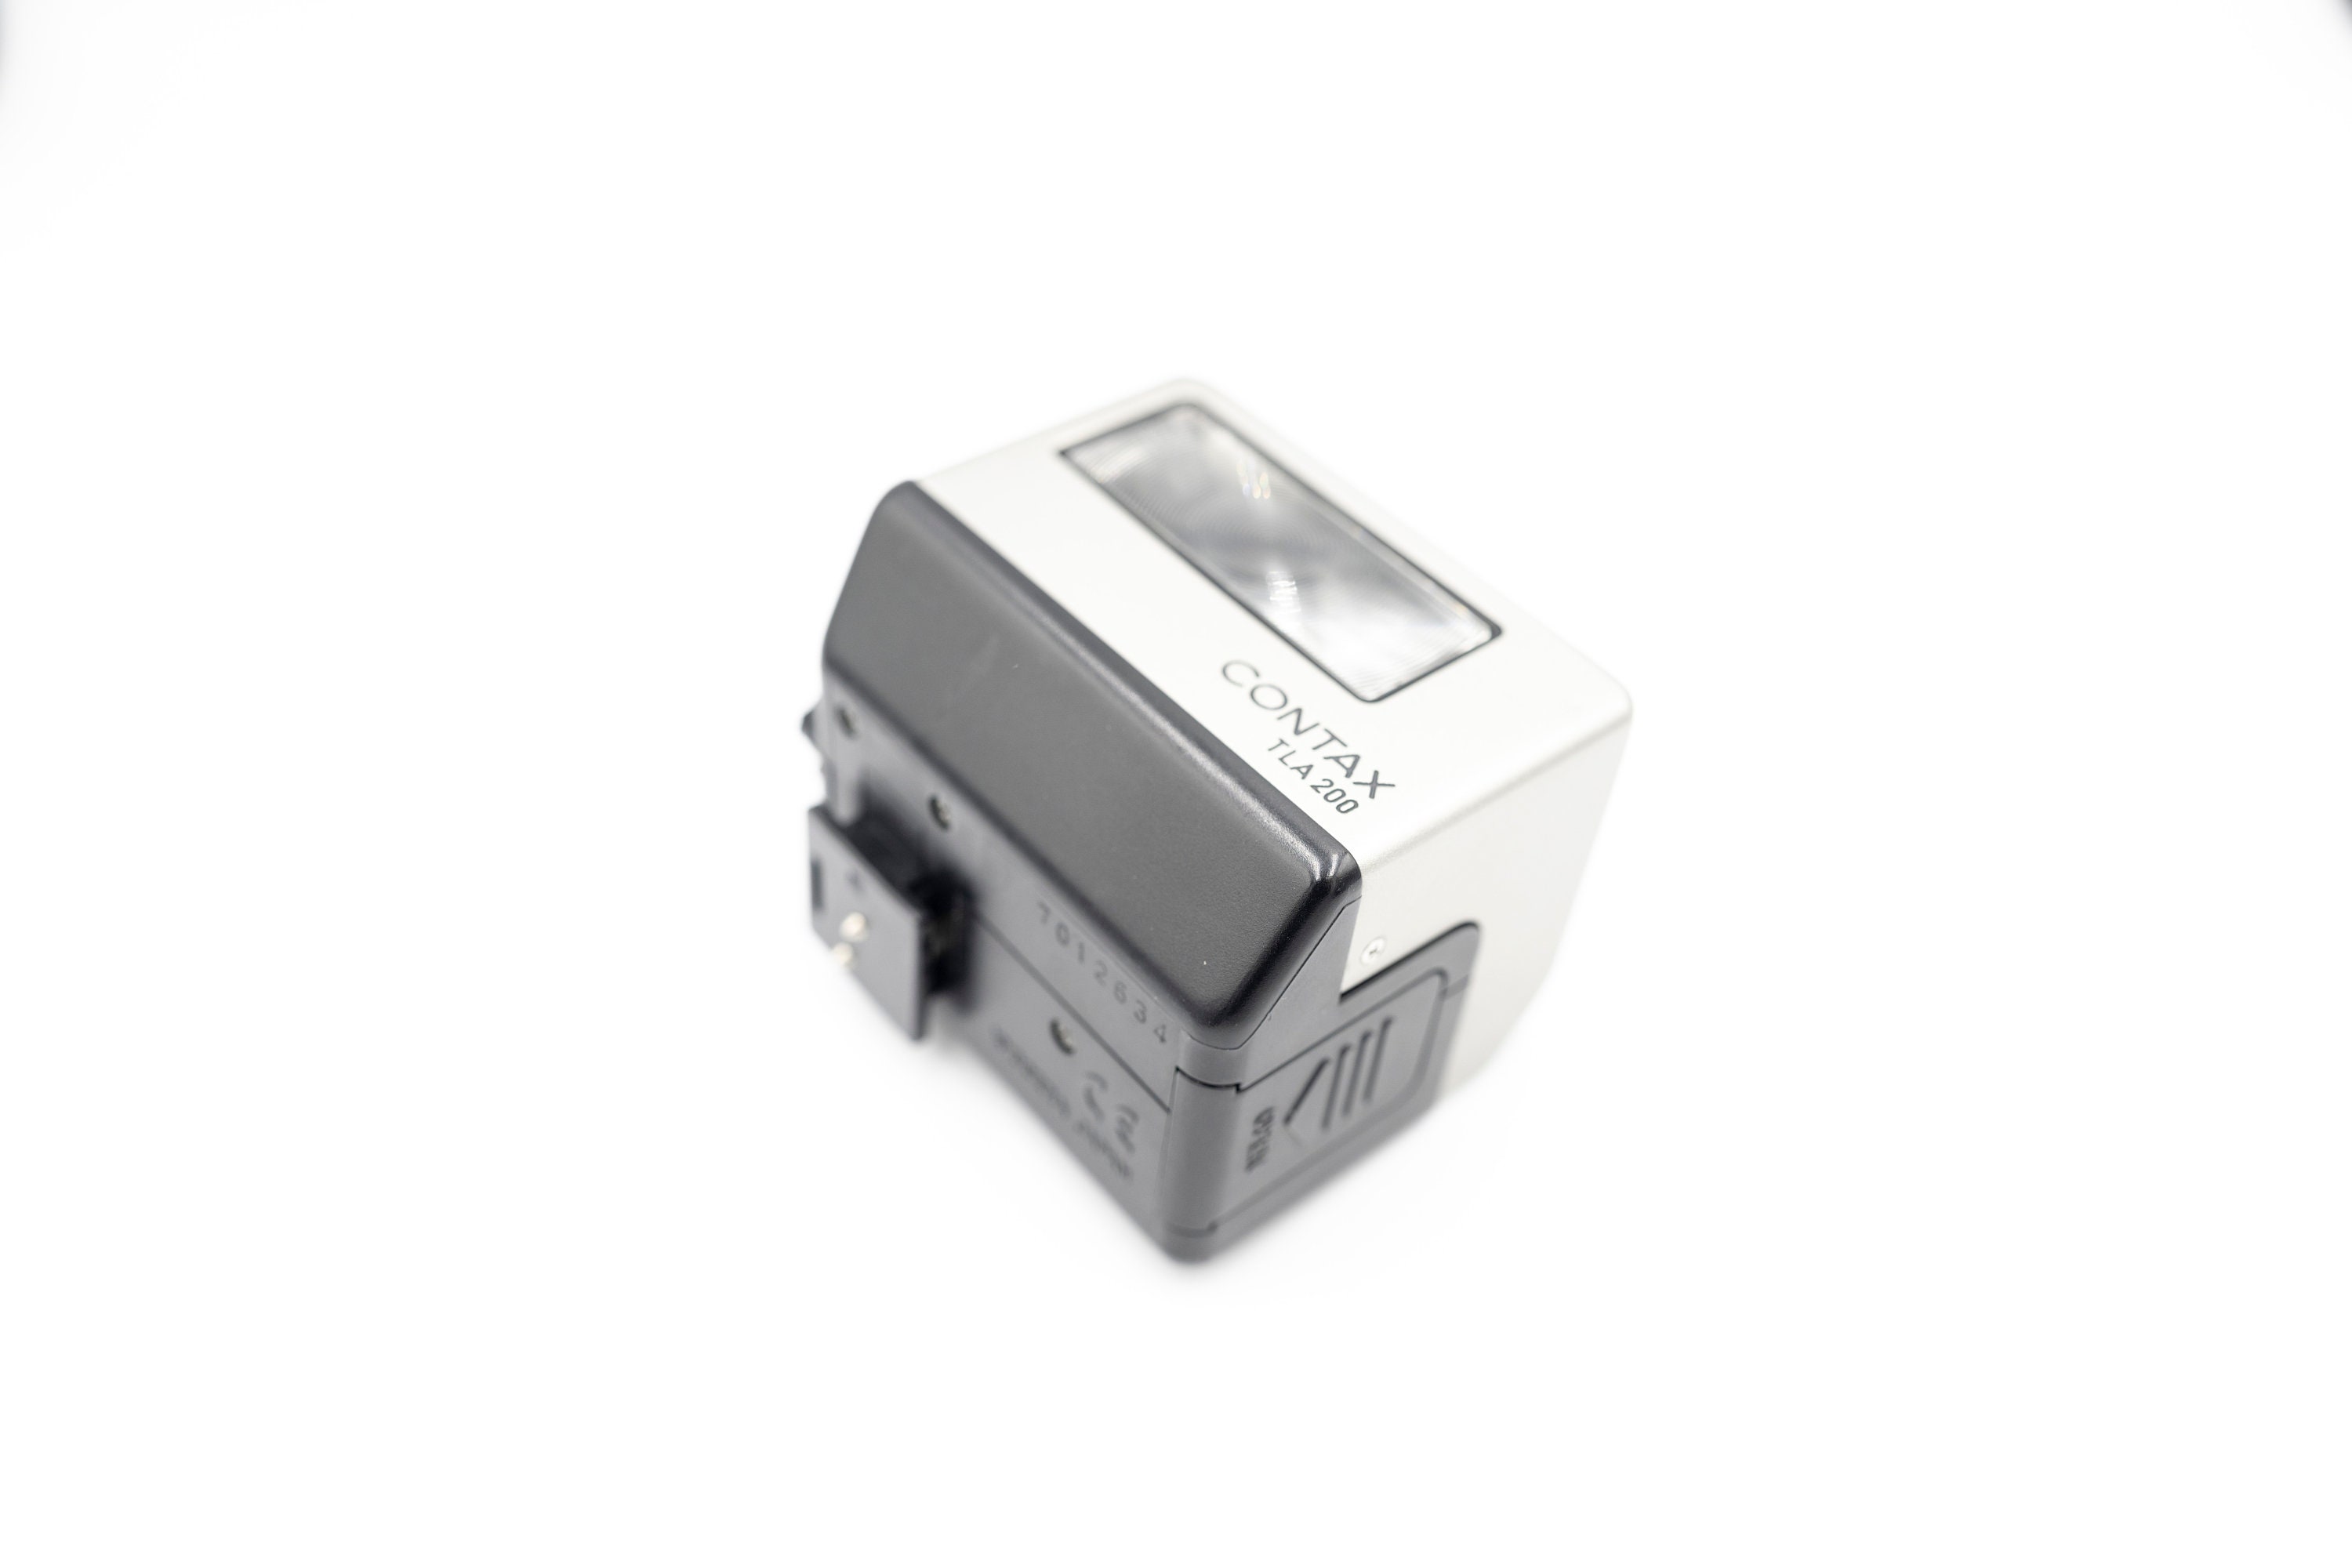 Top Mint: Contax TLA200 Silver Shoe Mount Flash for G1 G2 From